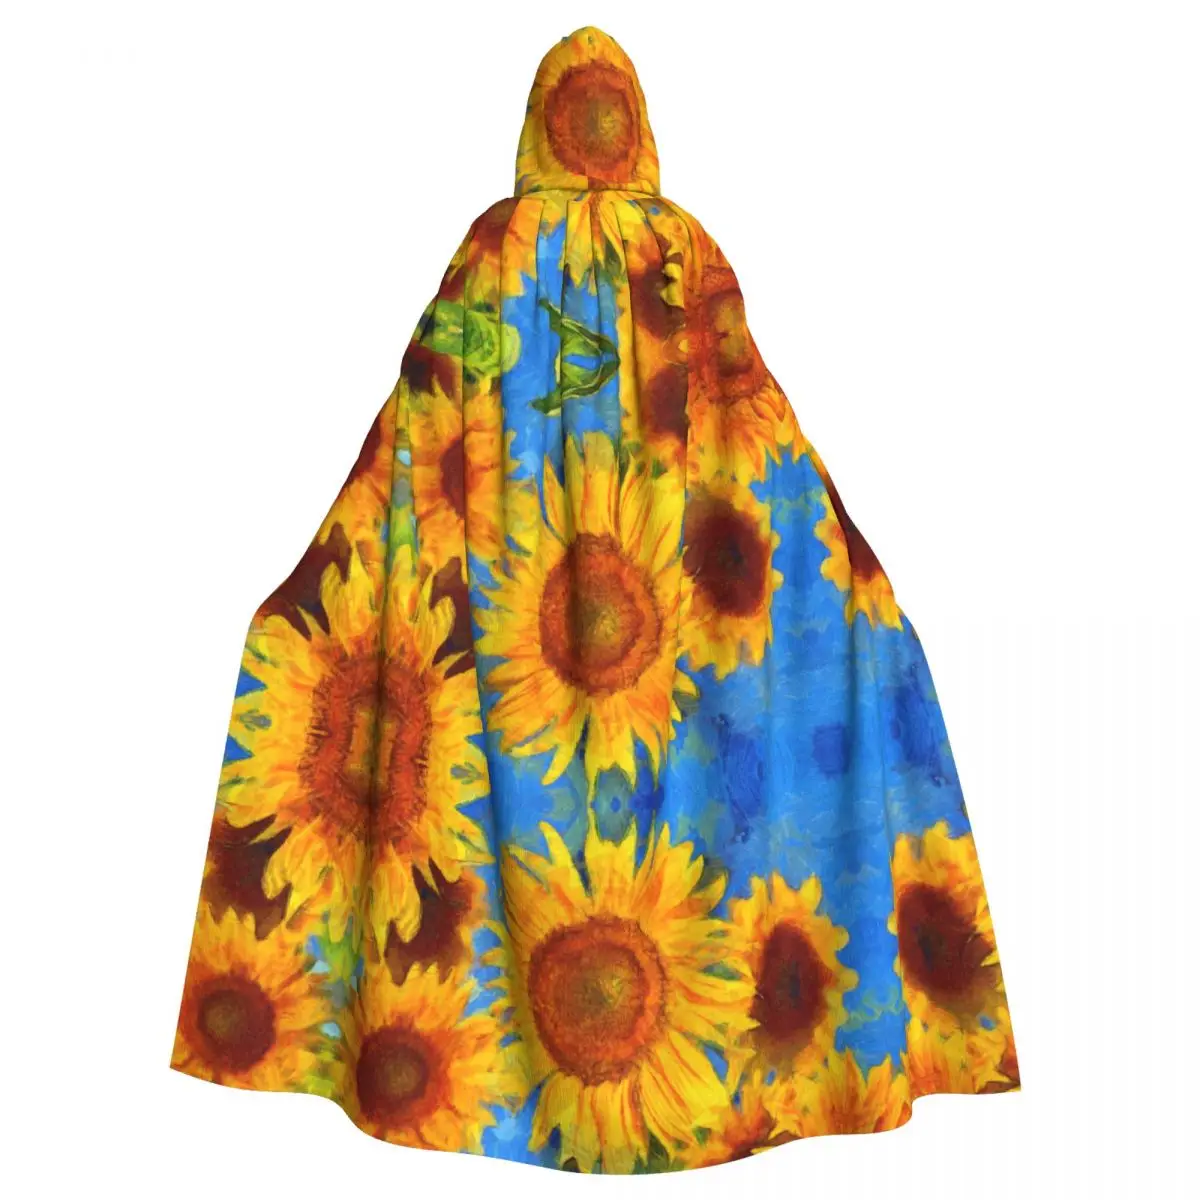 

Hooded Cloak Unisex Cloak with Hood Vincent Van Gogh's Sunflowers Cloak Vampire Witch Cape Cosplay Costume